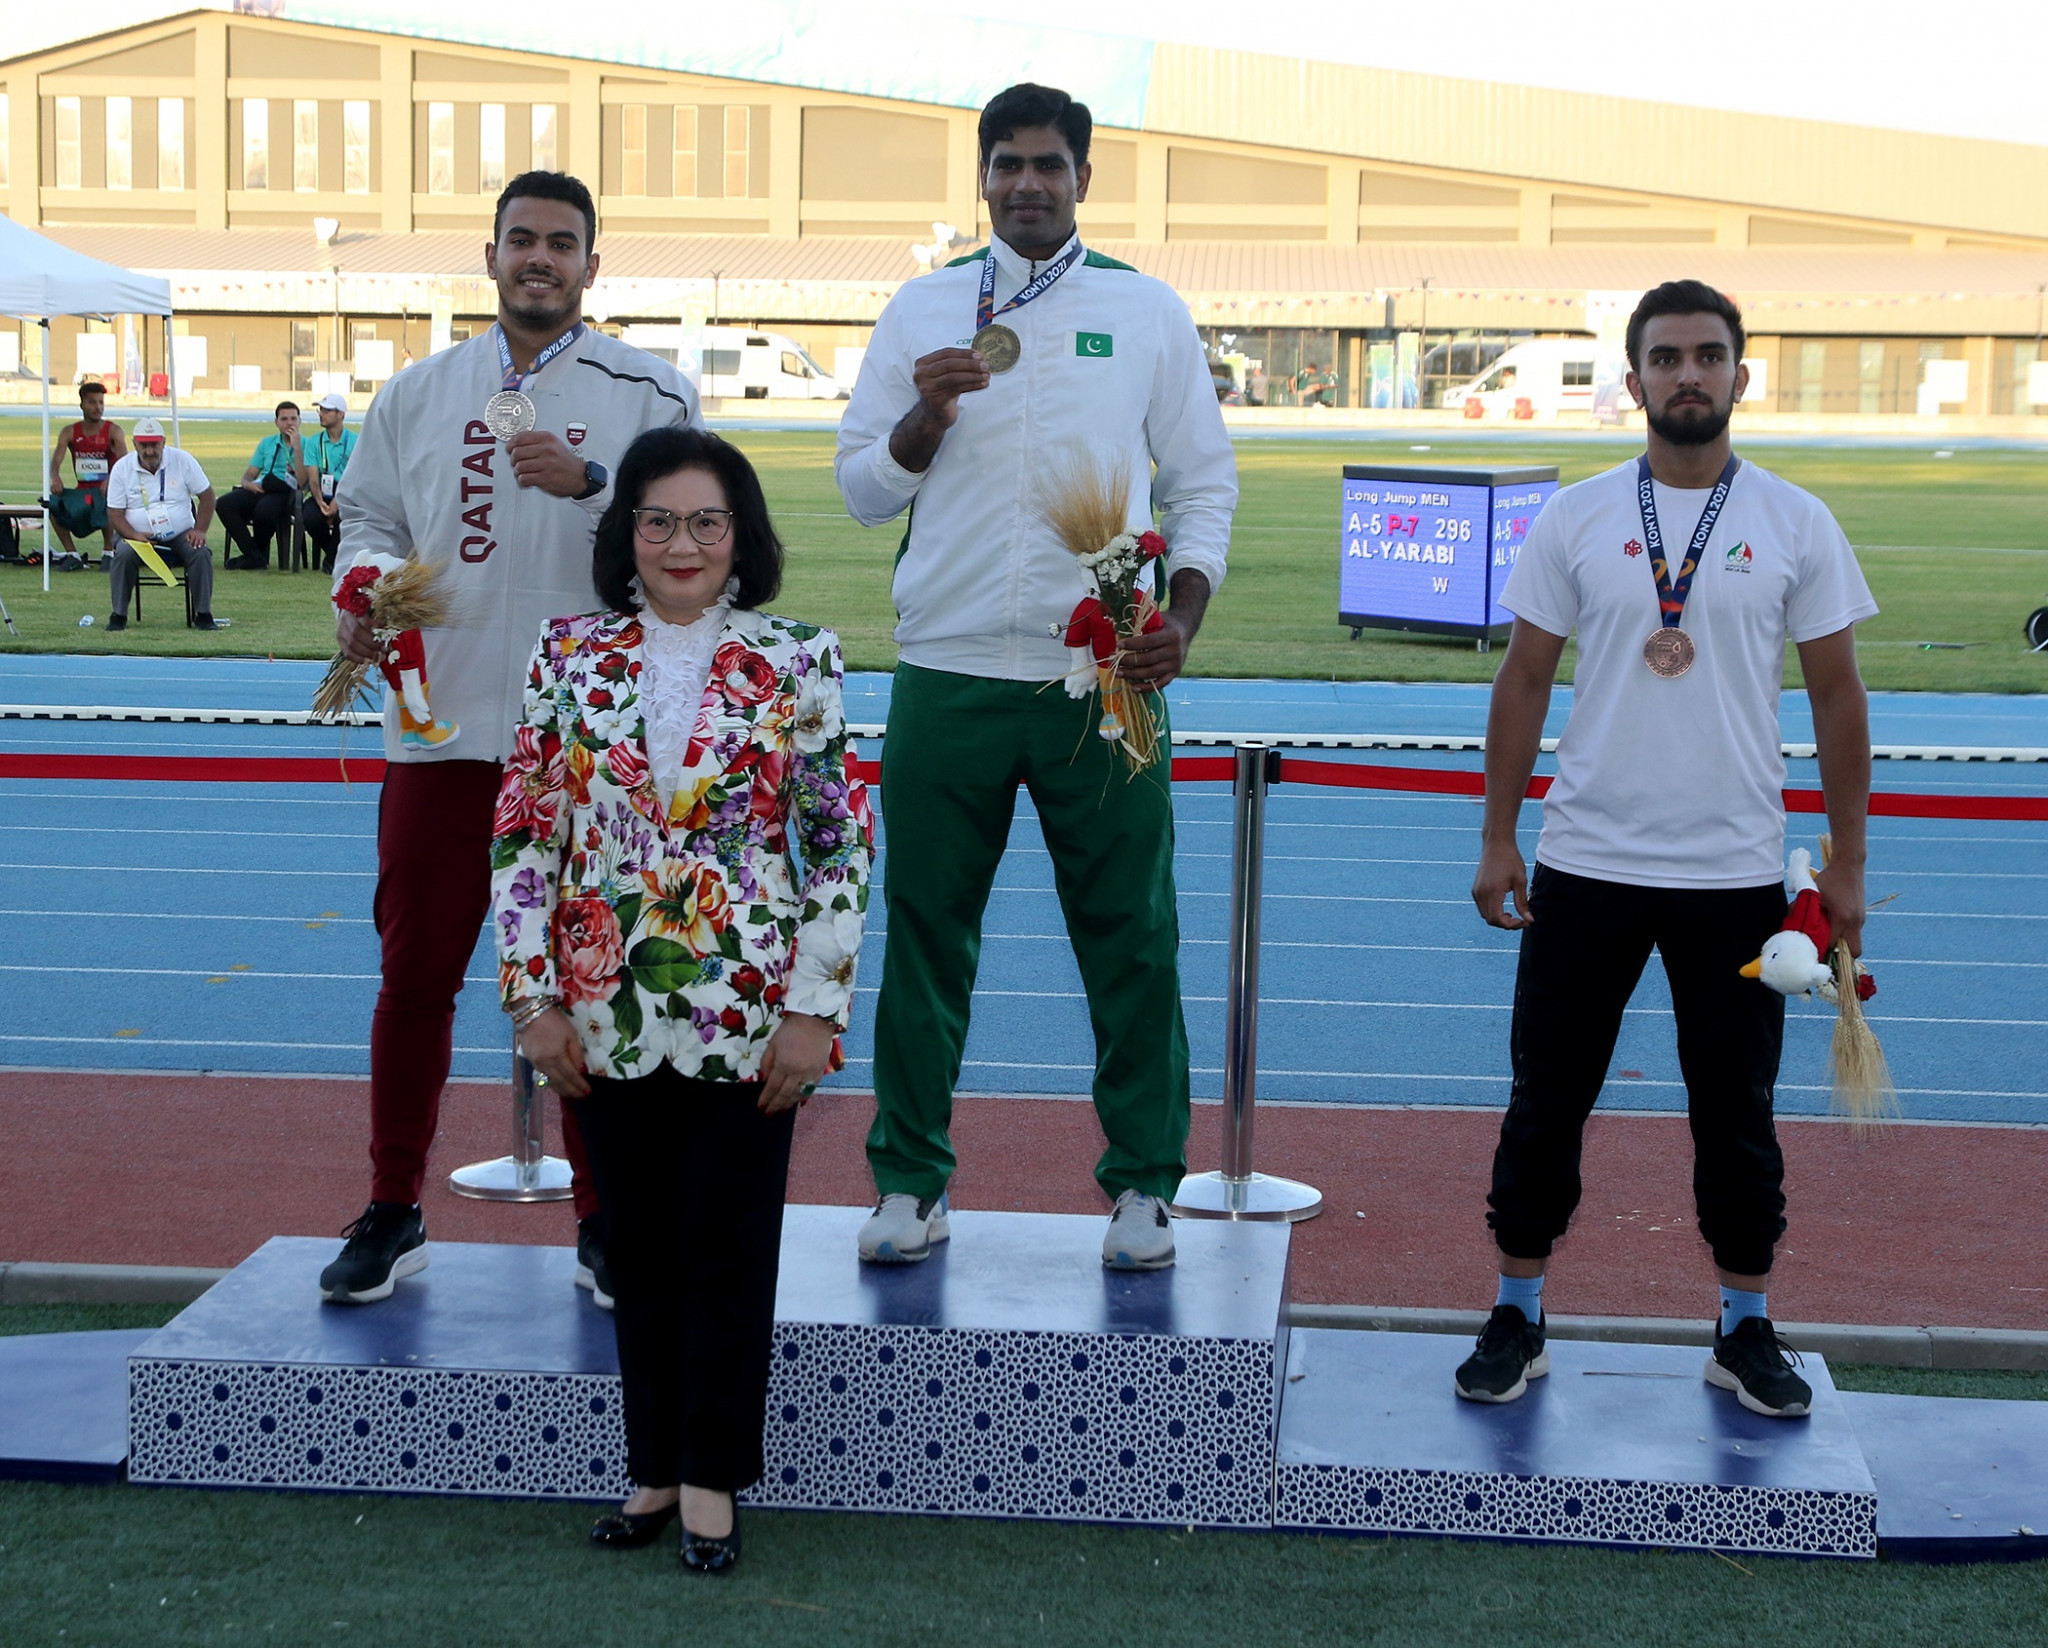 In-form javelin thrower Arshad Nadeem of Pakistan backed up his Commonwealth Games title with victory at the Islamic Solidarity Games ©Konya 2021